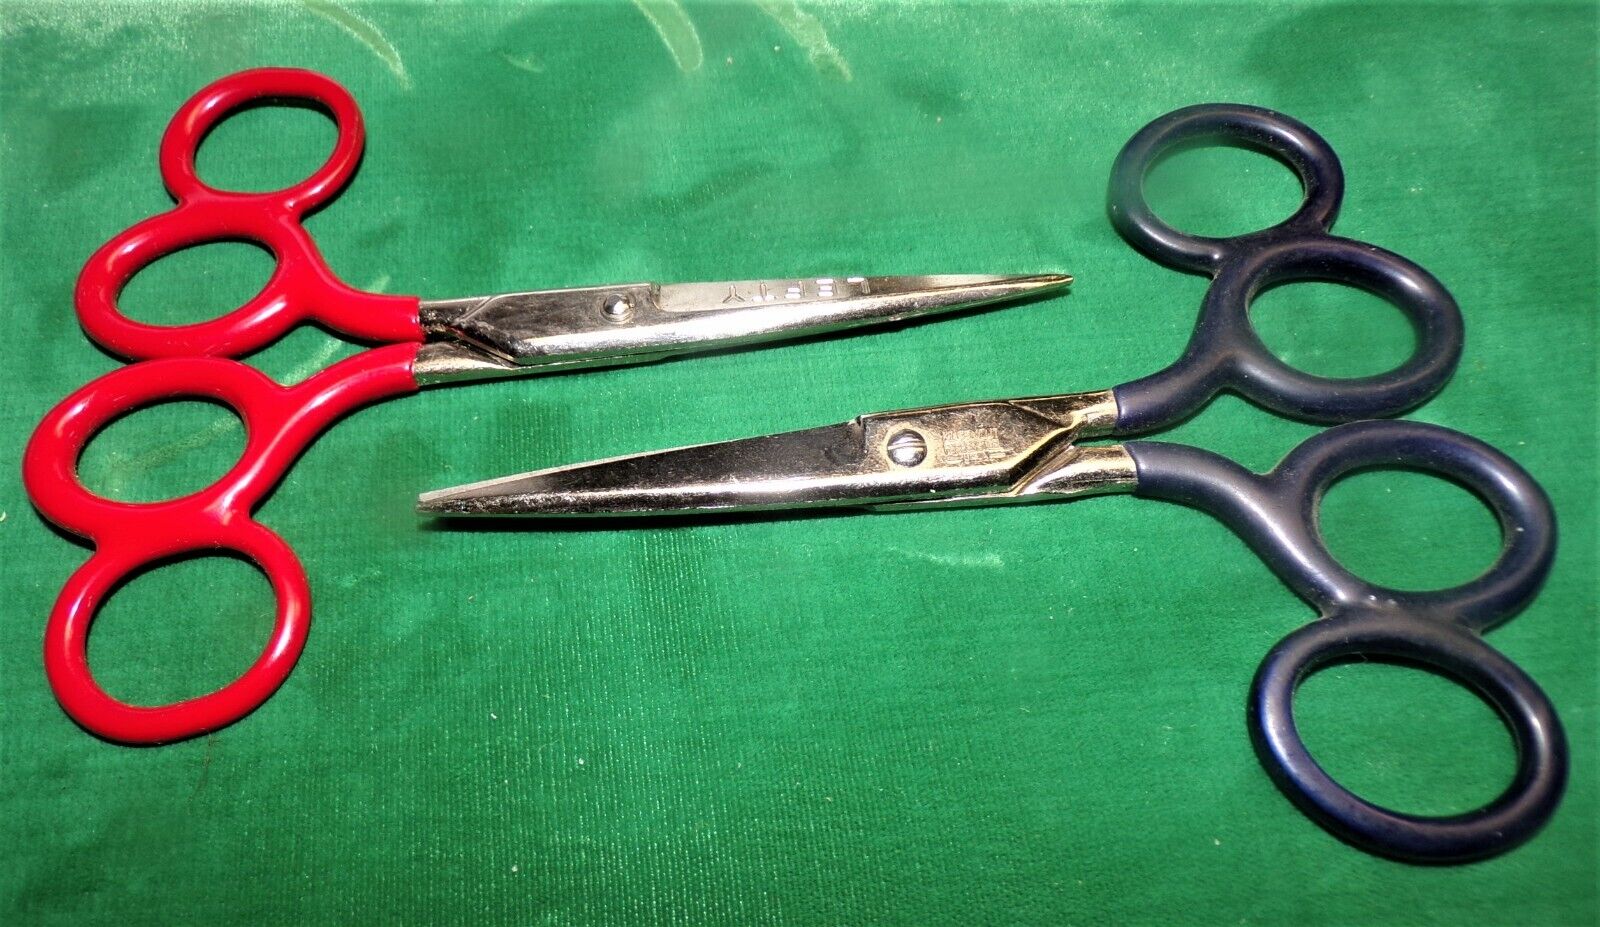 Vintage Kleencut Forged Steel 4 Finger Training Student Scissors Righty + Lefty